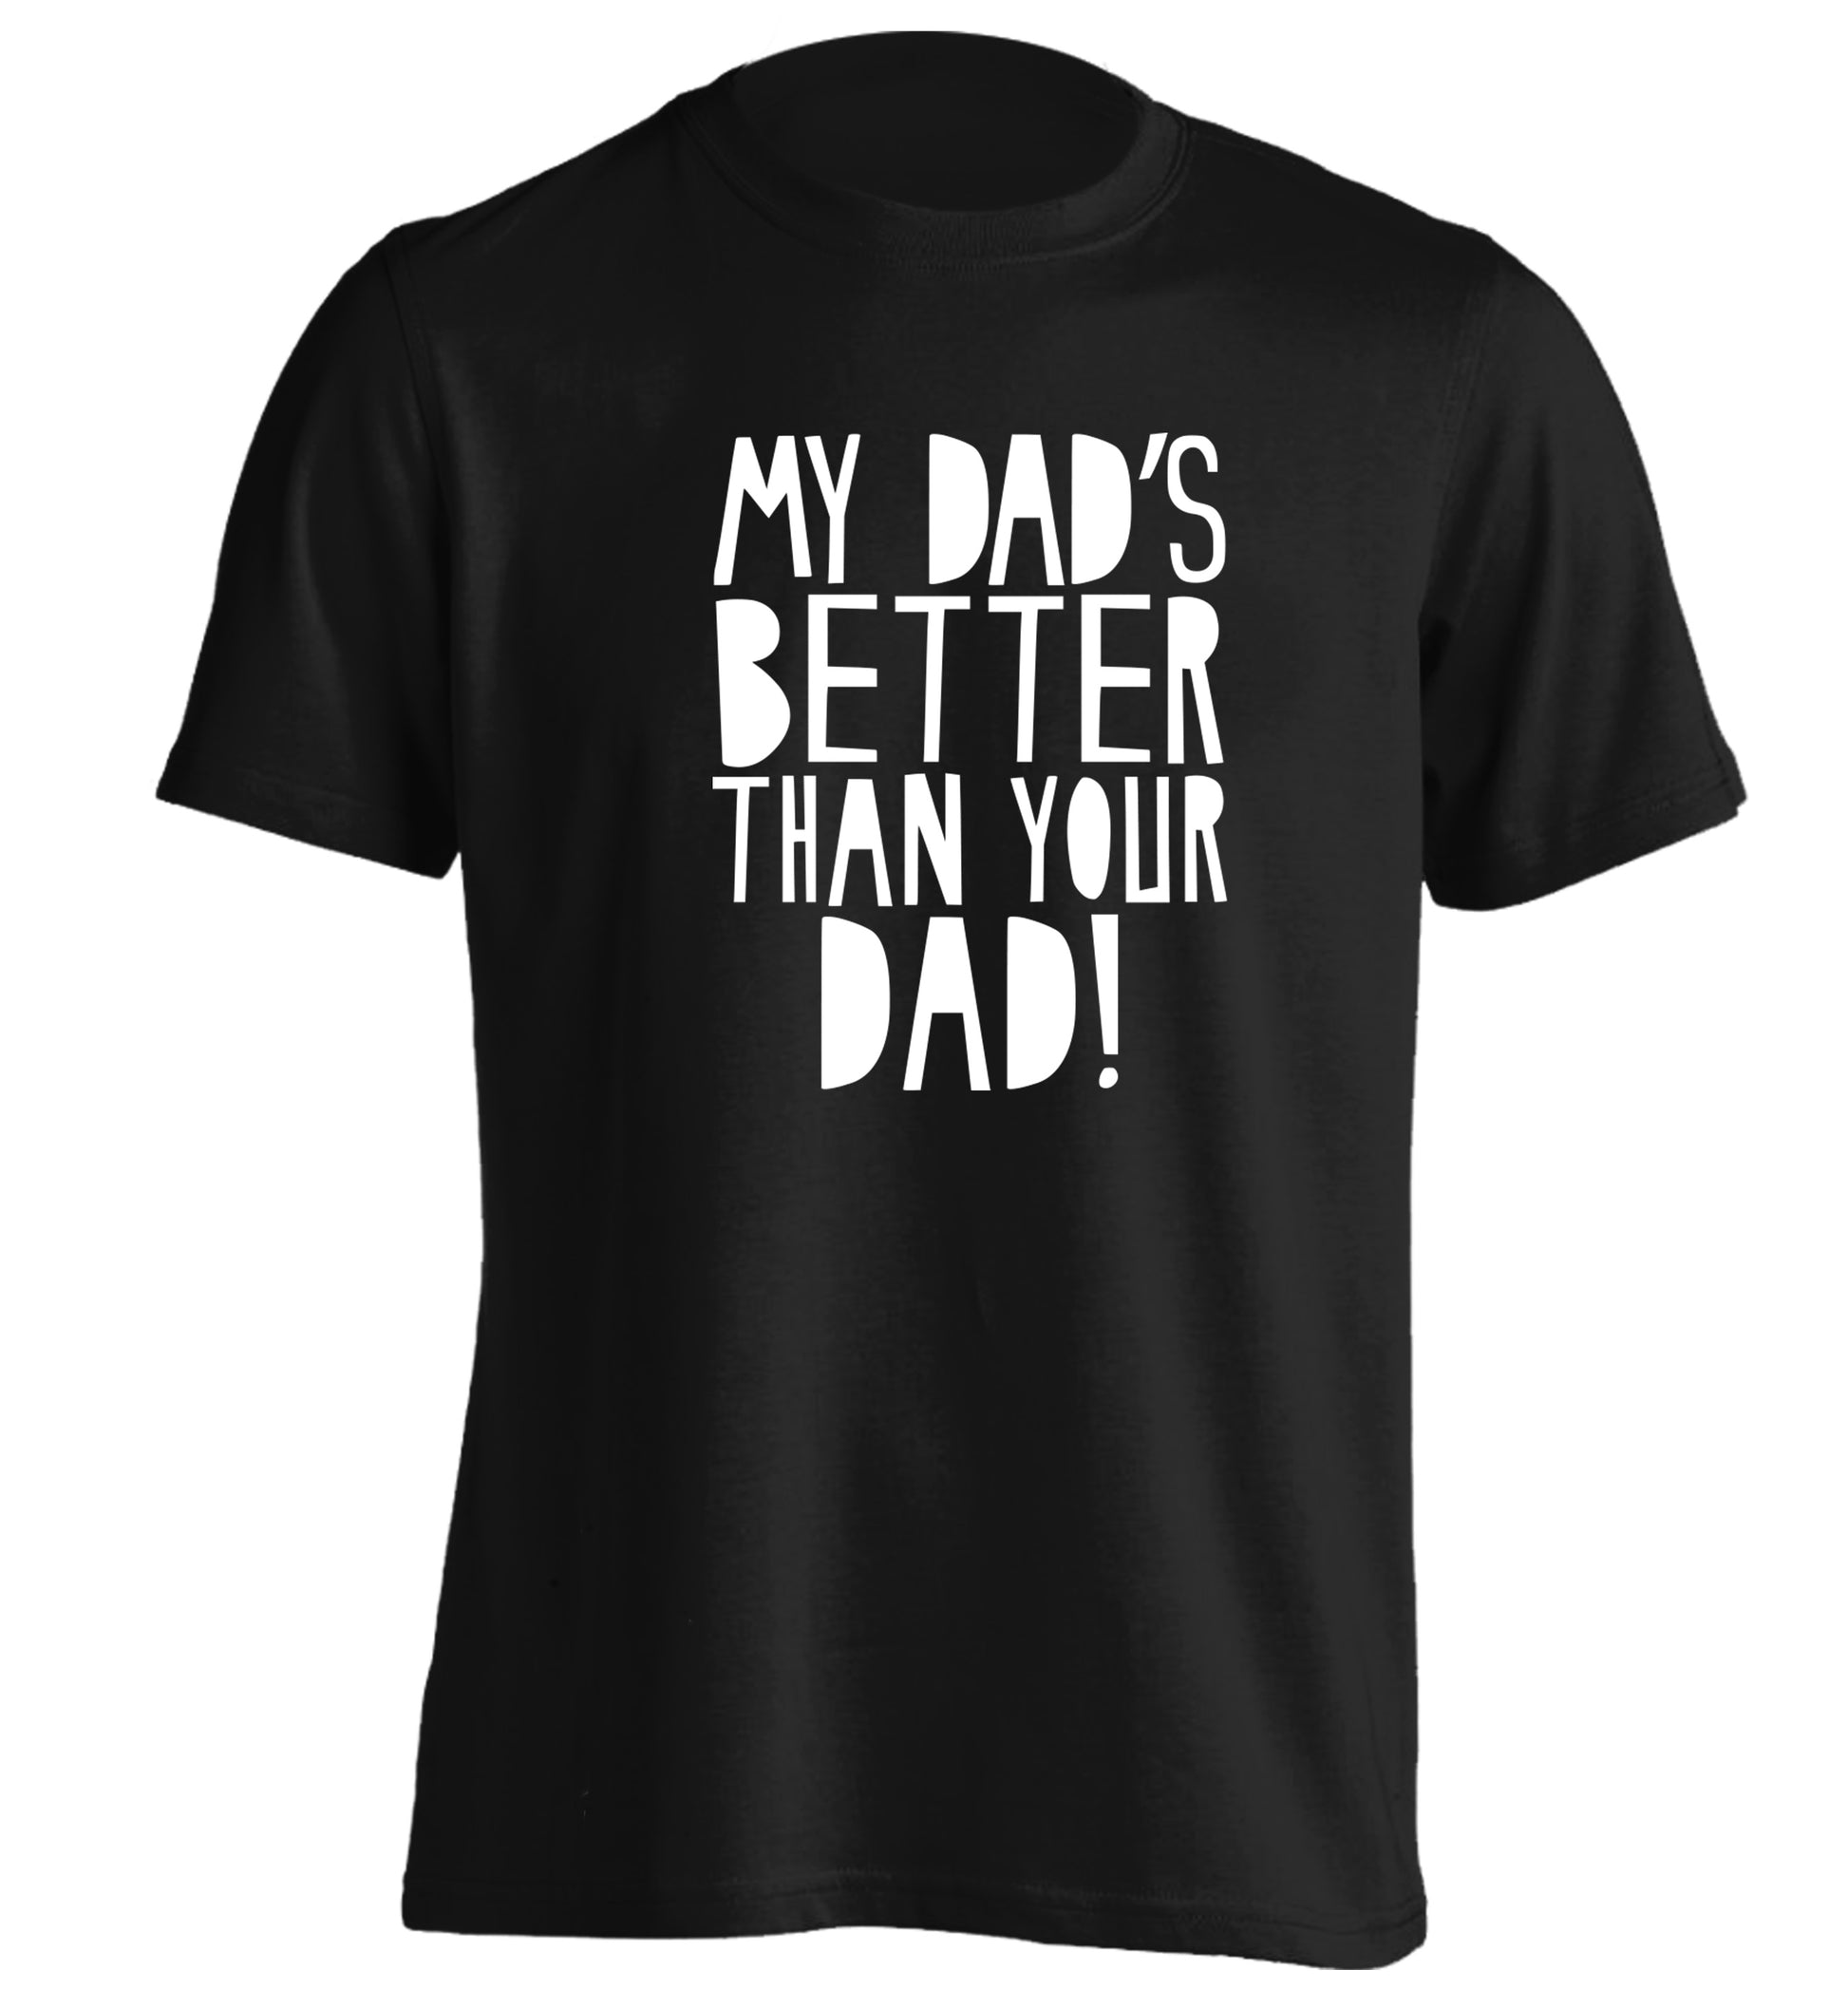 My dad's better than your dad adults unisex black Tshirt 2XL